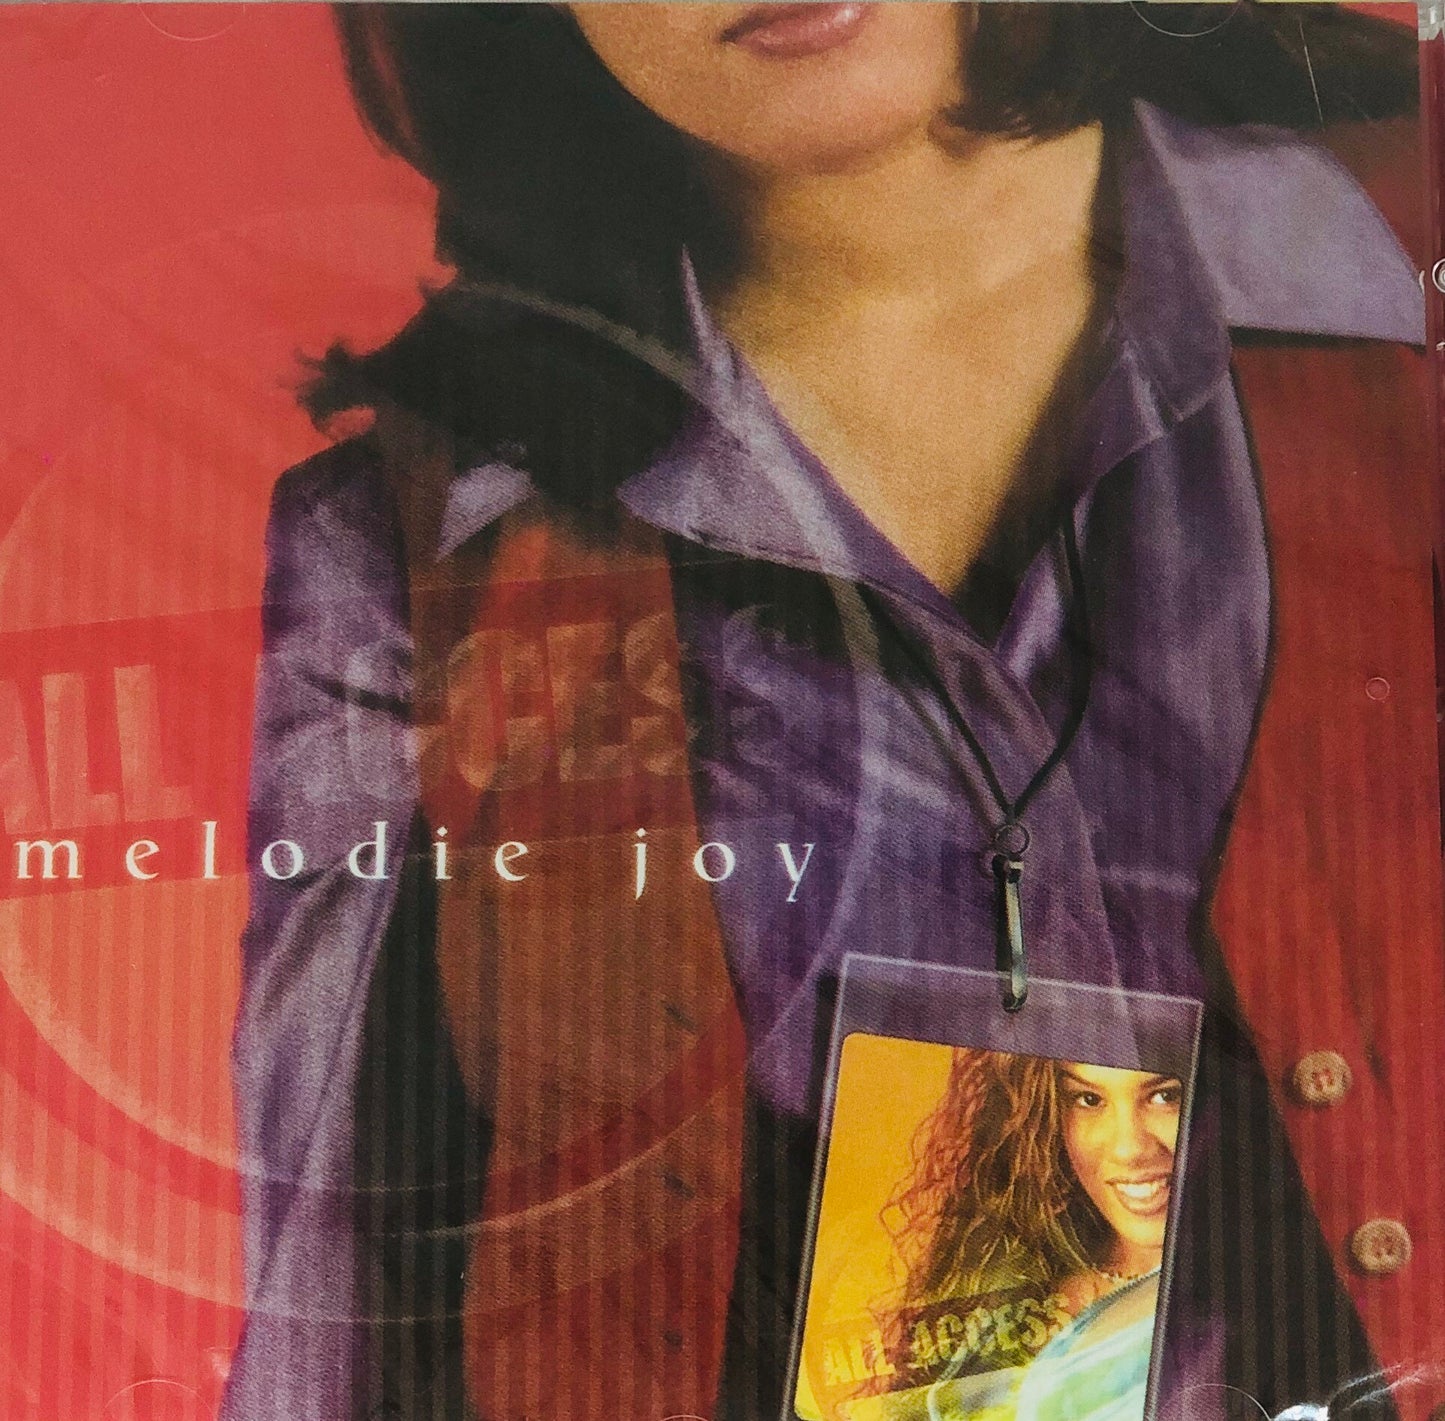 CD - All Access - Melodie Joy - One Voice Music